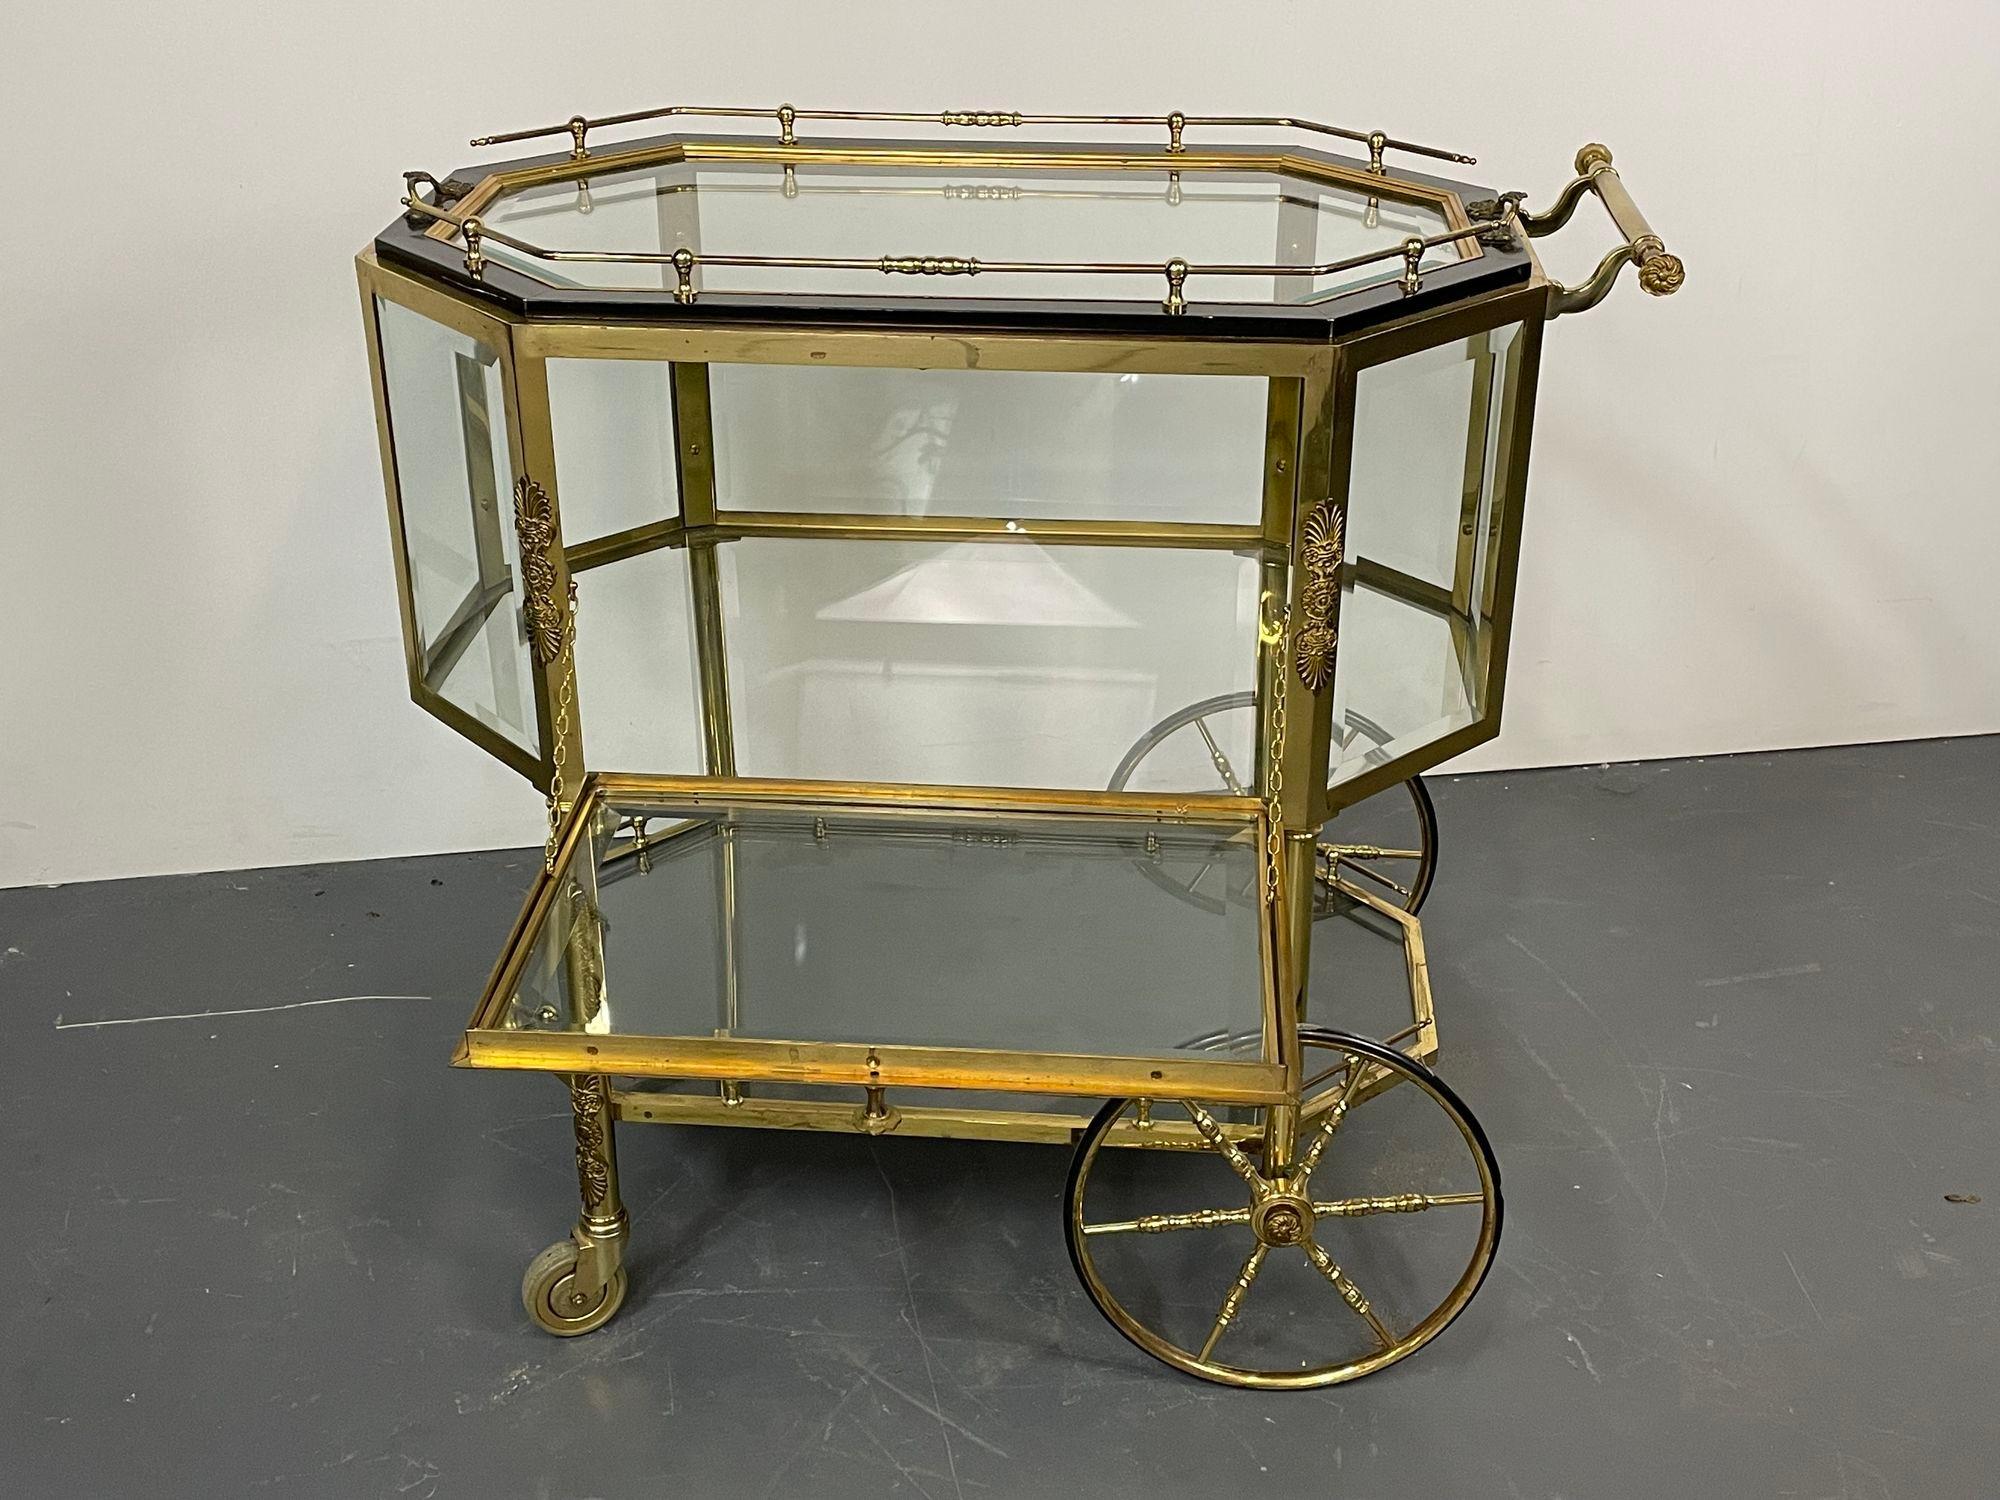 Hollywood Regency Beveled glass, bronze and brass tea Wagon or Serving Cart. One of two available.

Beveled glass bronze tea wagon or serving cart. This wonderful Hollywood Regency style cart has small wheels in front with large wheels in back